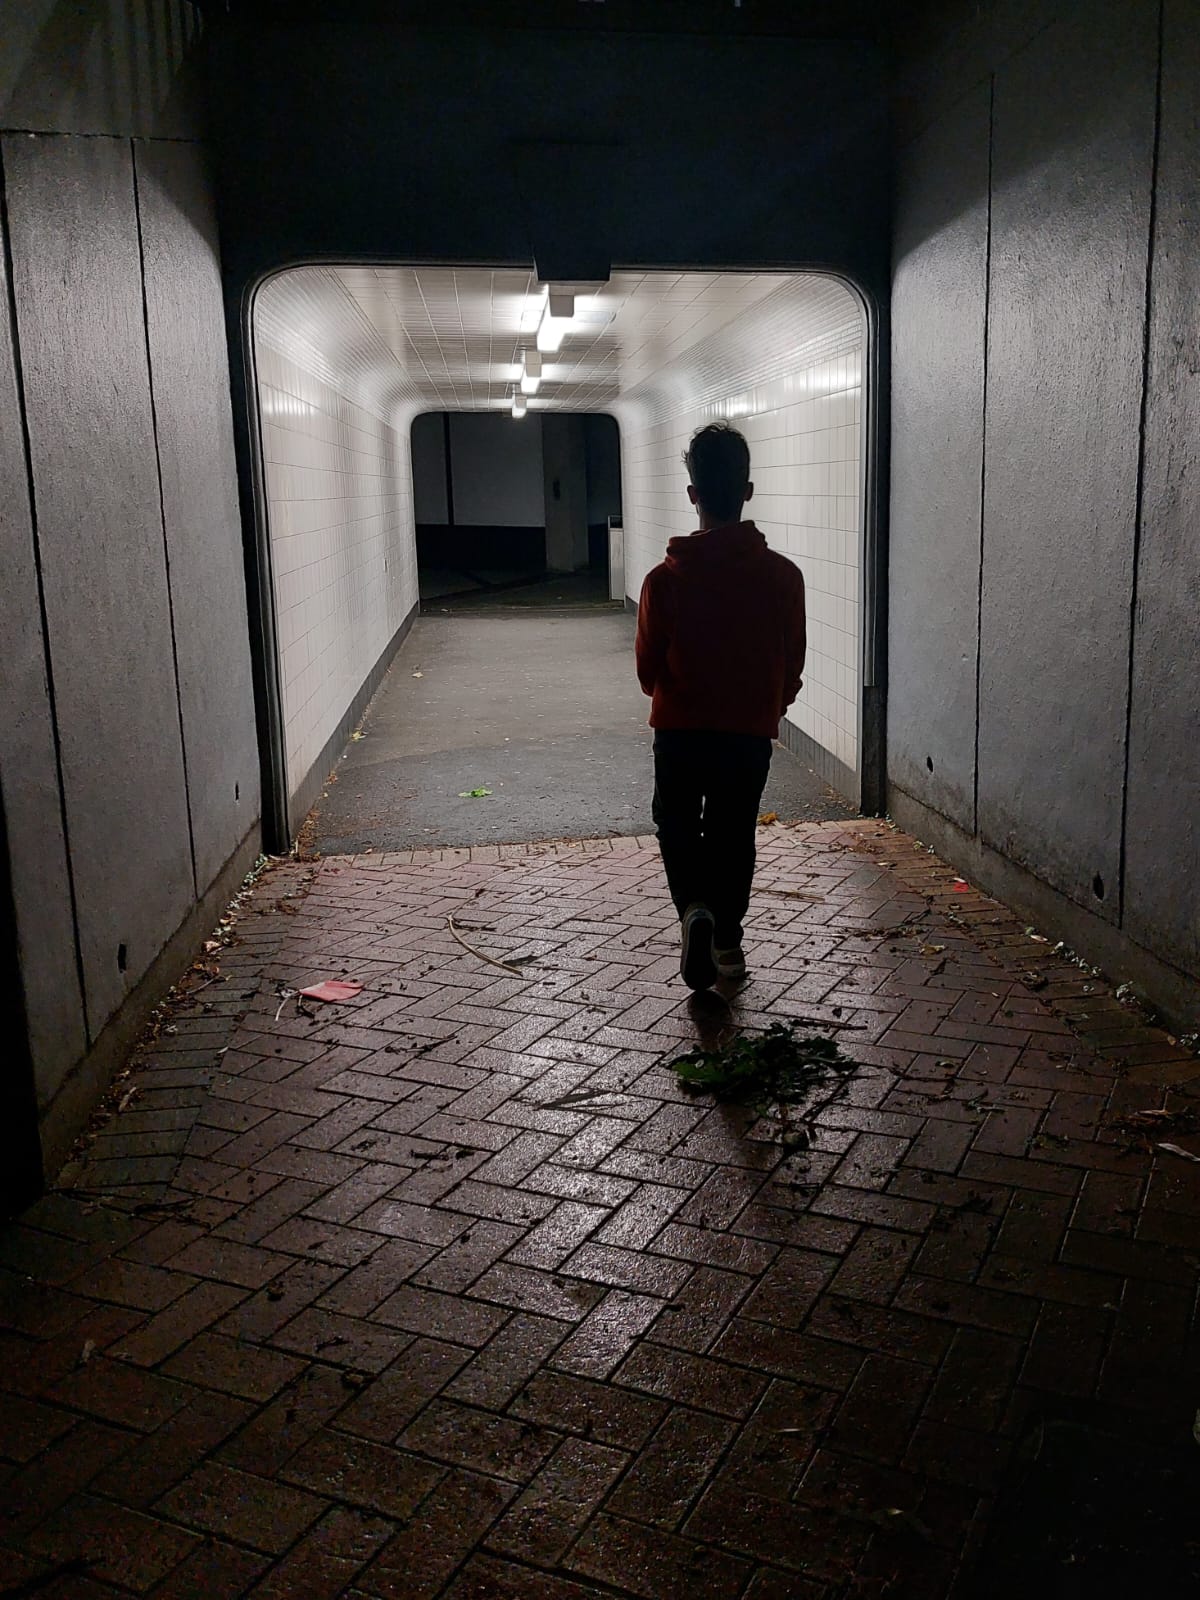 A person walking through a tunnel at night.